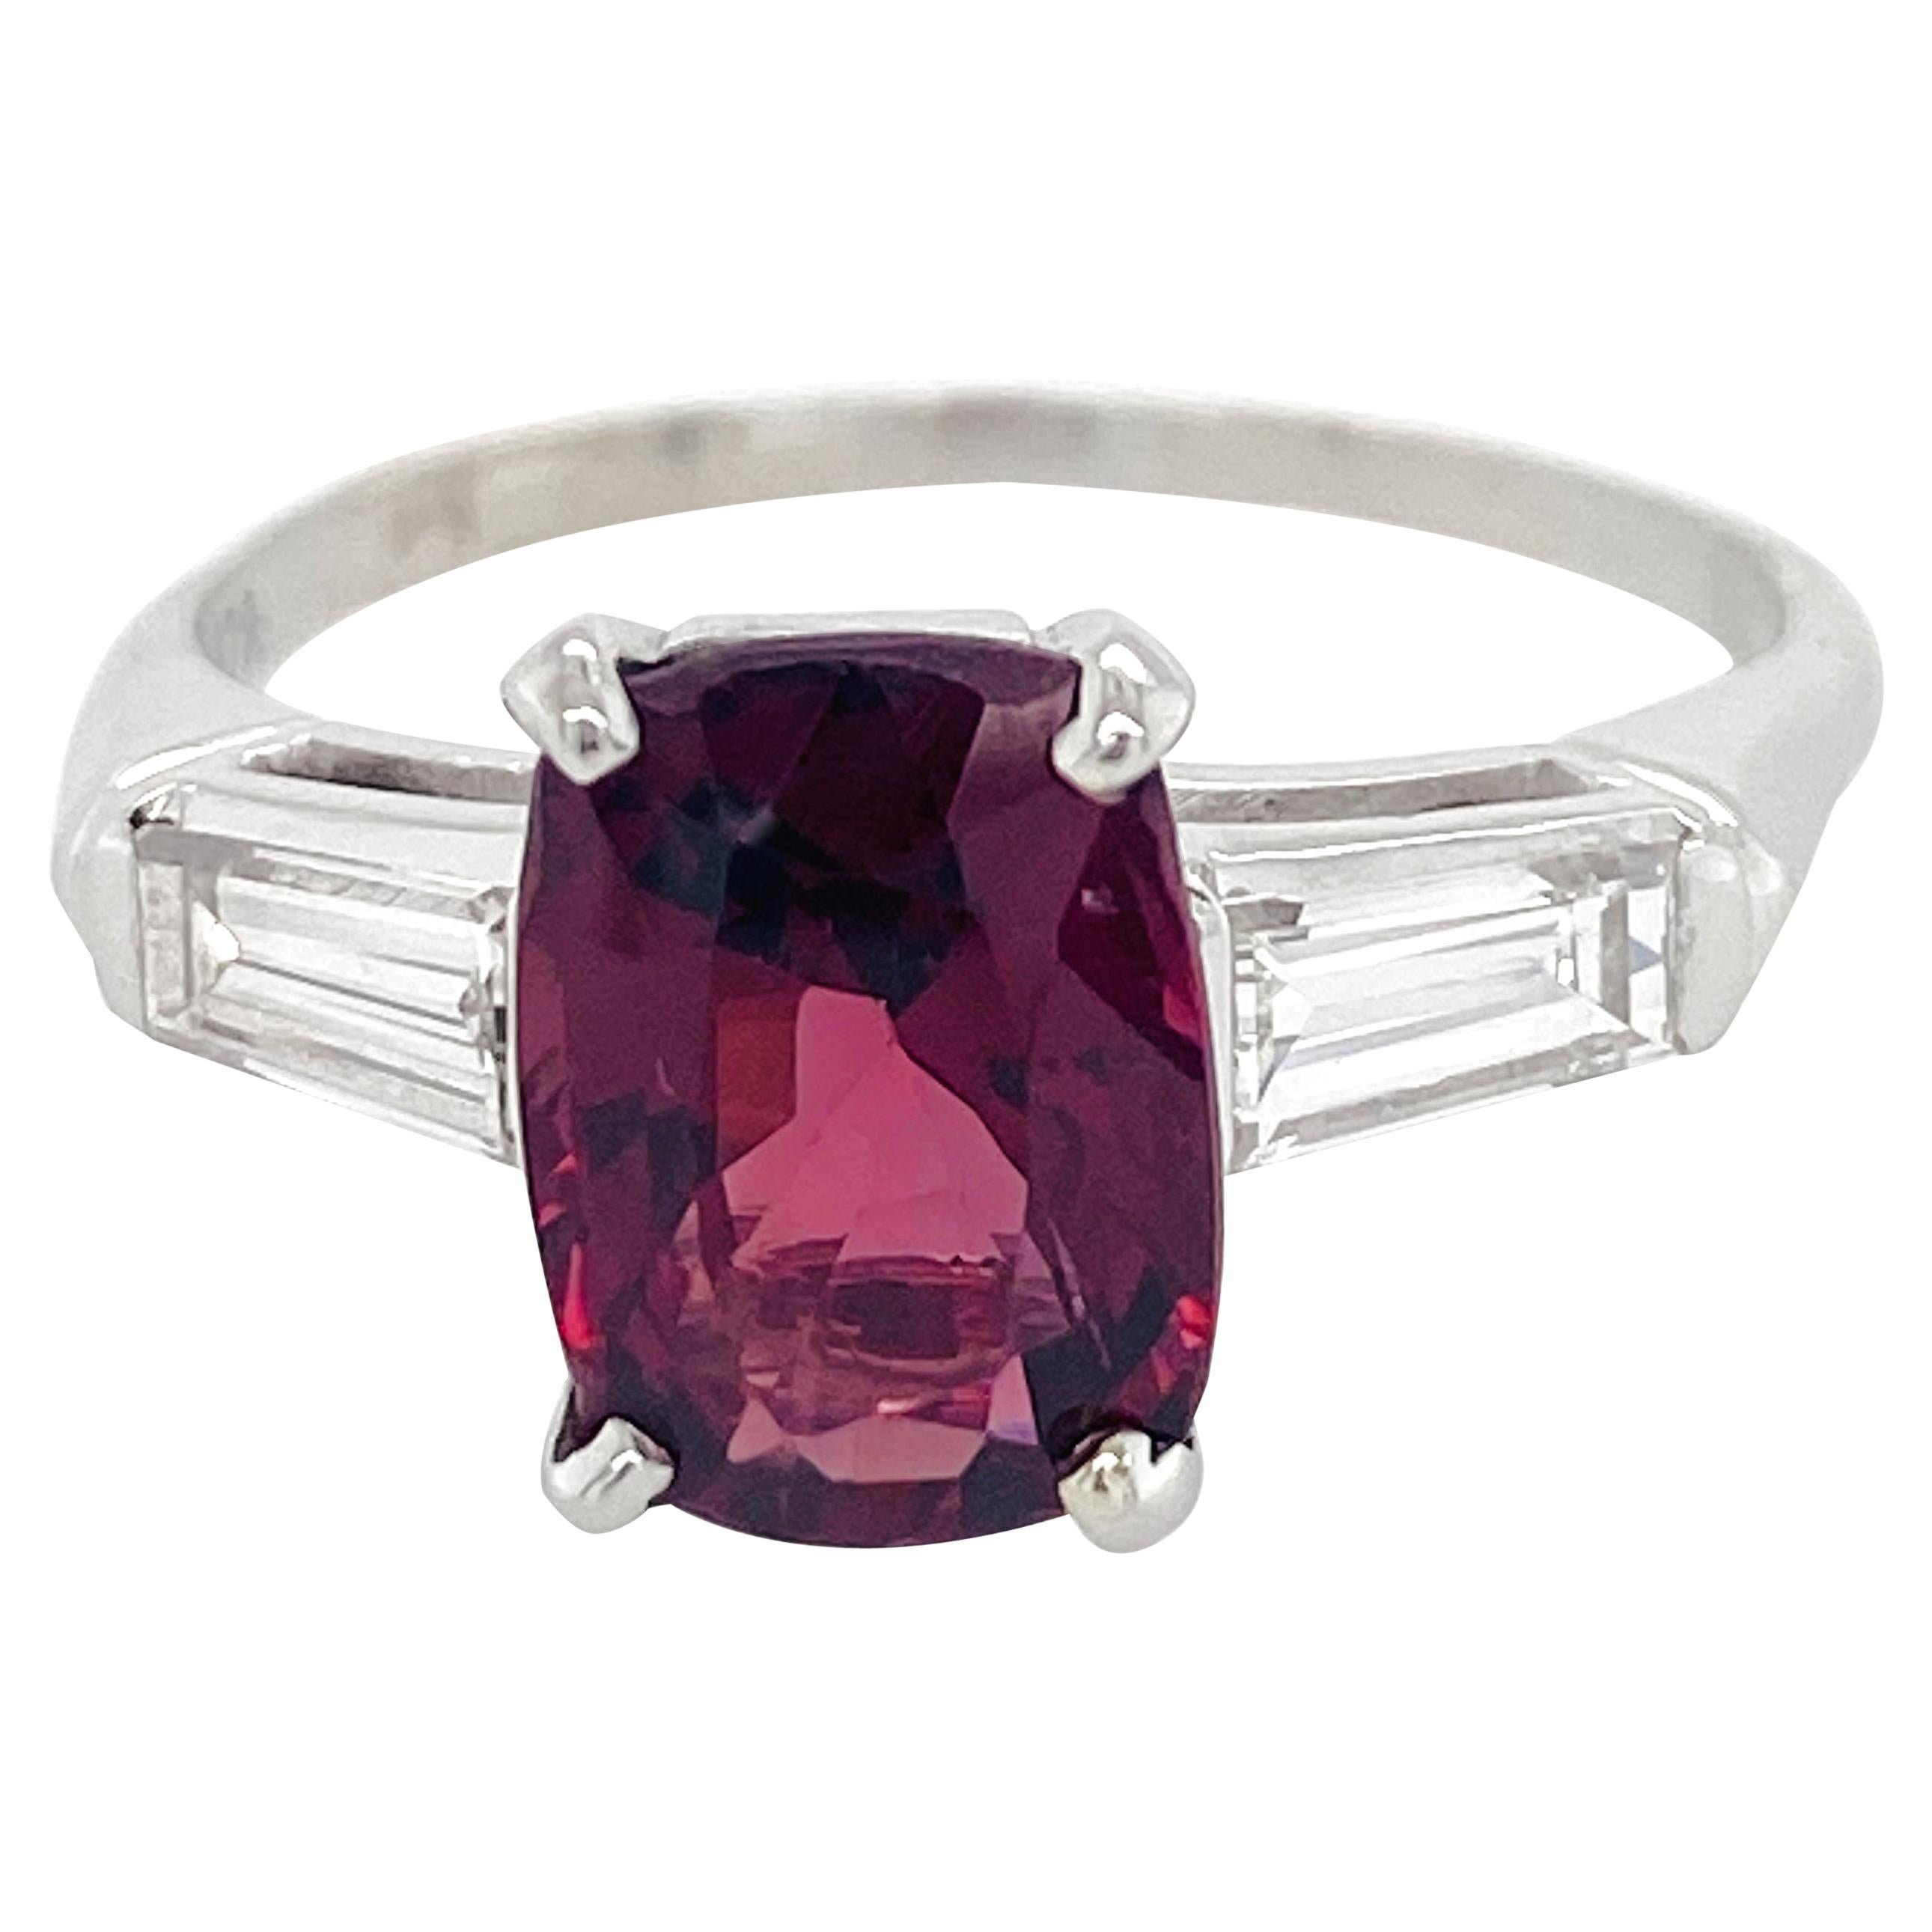 2 Carat Red Spinel Set in Classic Platinum 3-Stone Ring with Diamond Baguettes